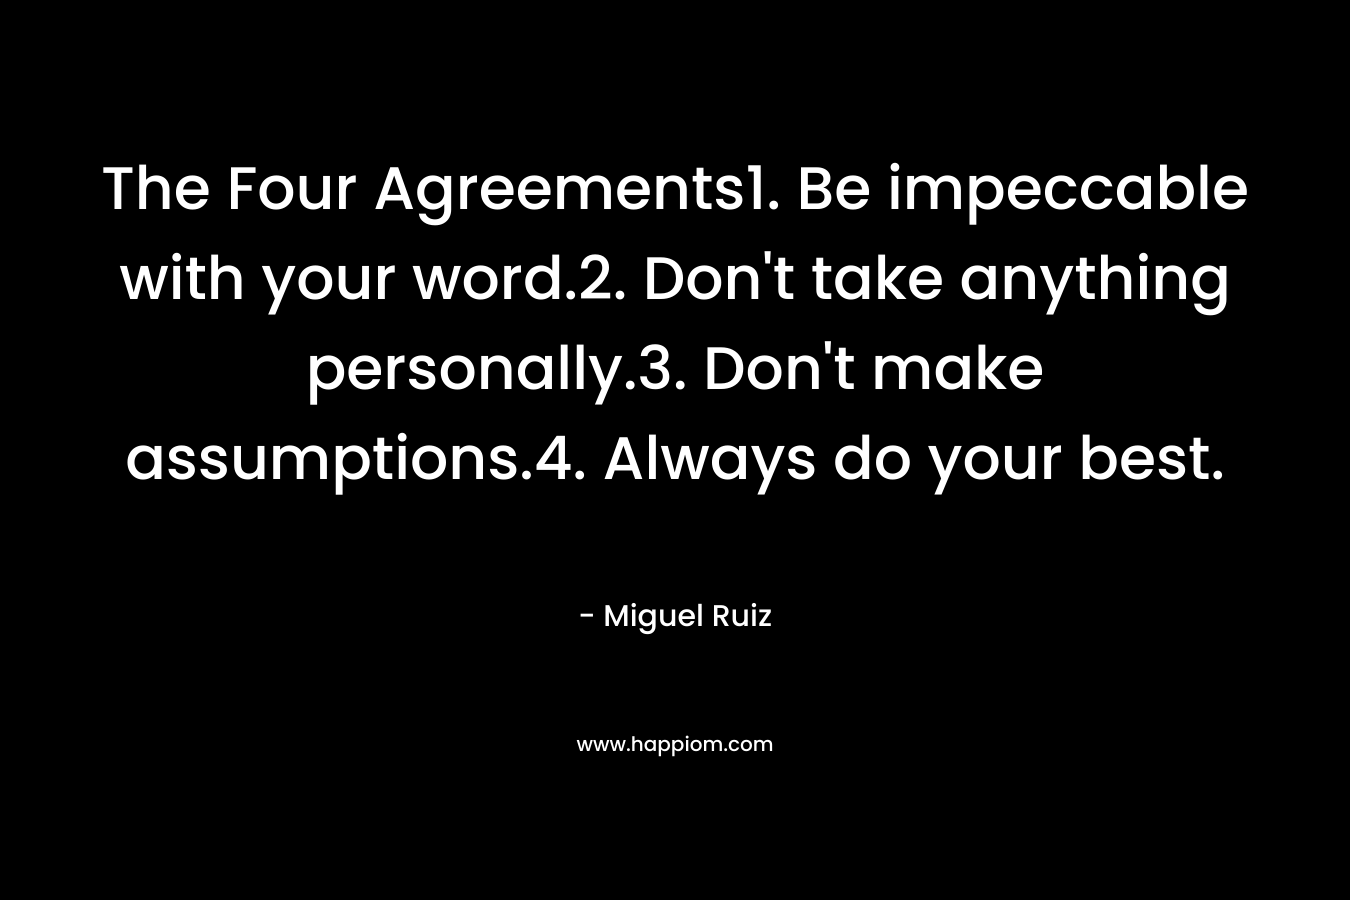 The Four Agreements1. Be impeccable with your word.2. Don’t take anything personally.3. Don’t make assumptions.4. Always do your best.  – Miguel Ruiz